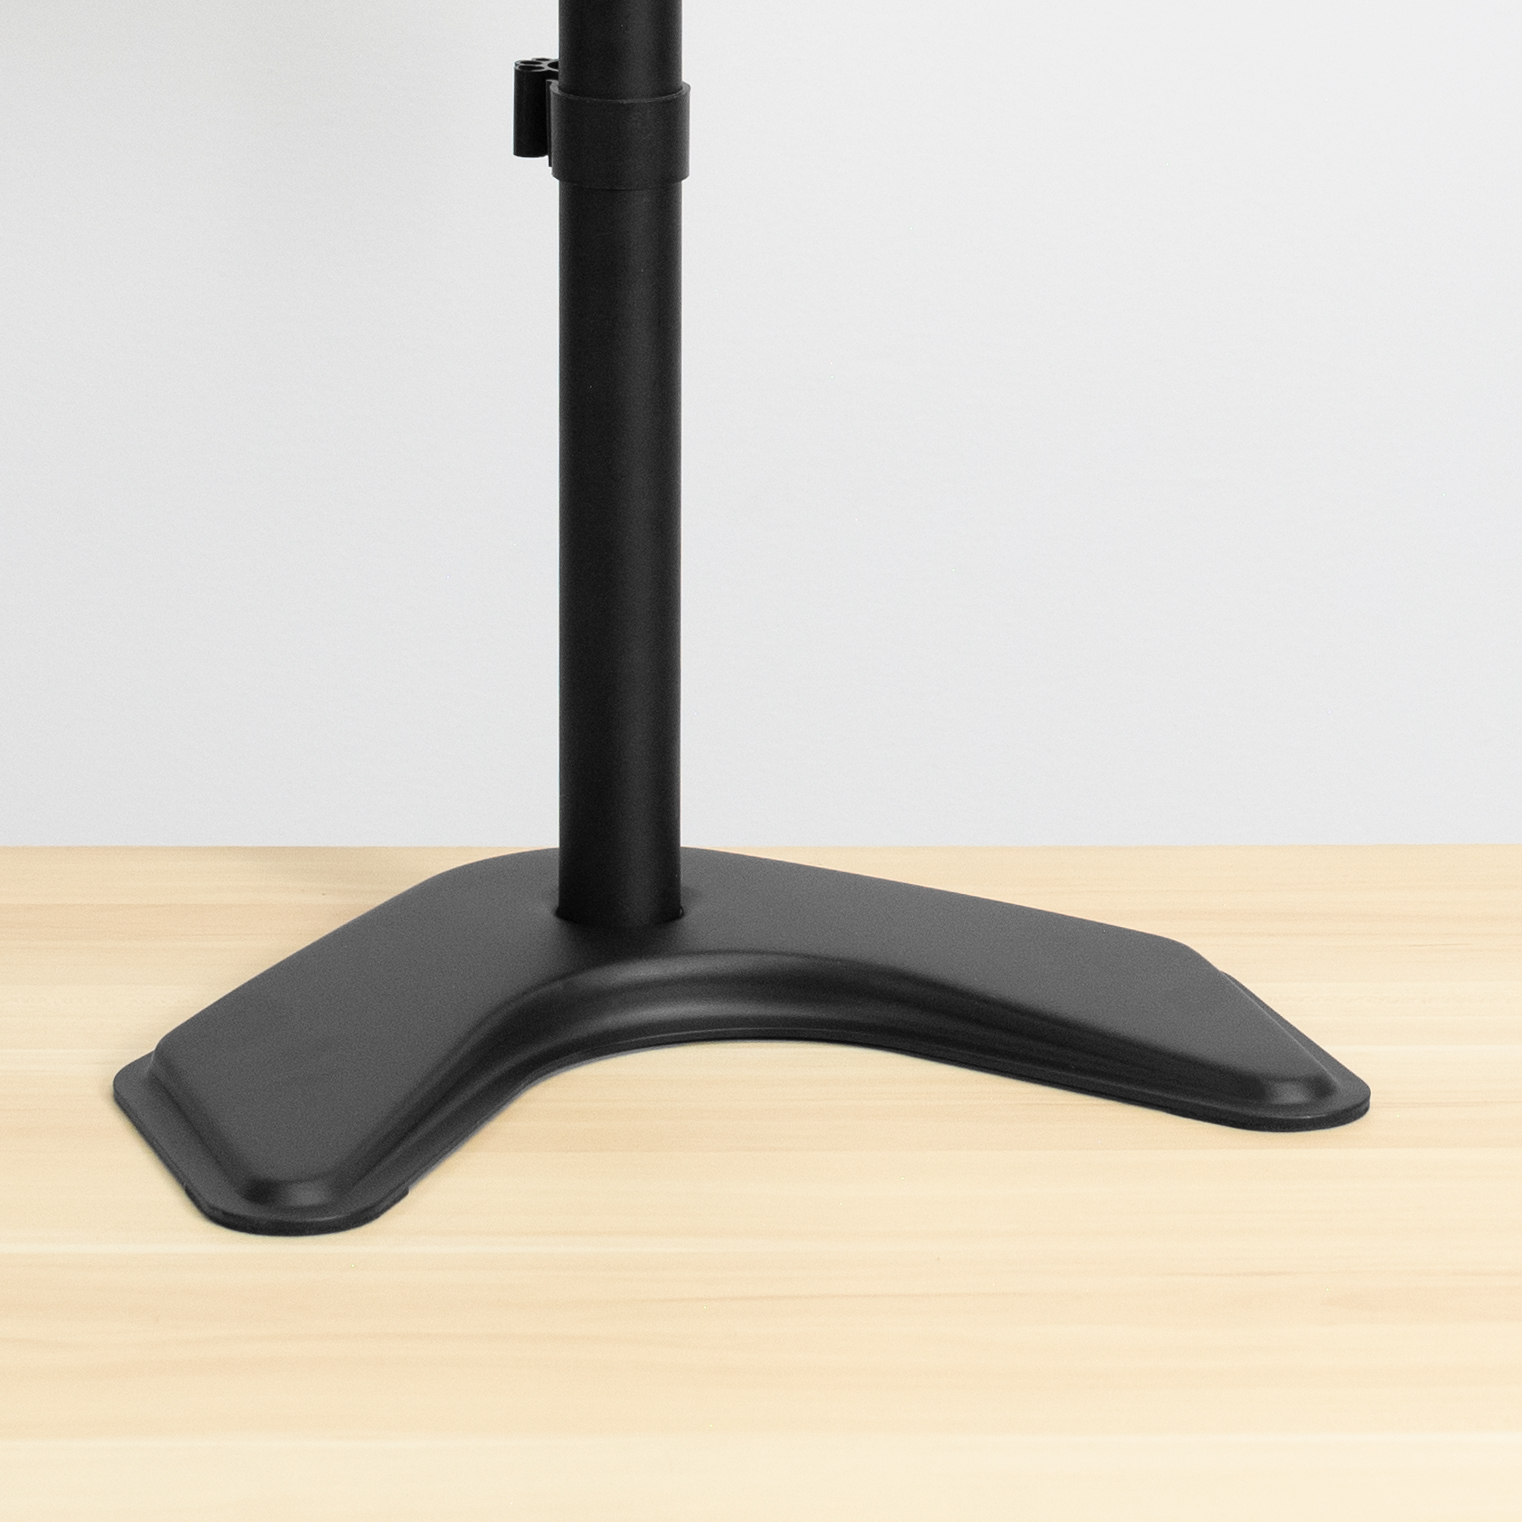 VIVO Freestanding Base for Monitor Desk Stand, 13" x 11" Platform with Padding - image 4 of 6